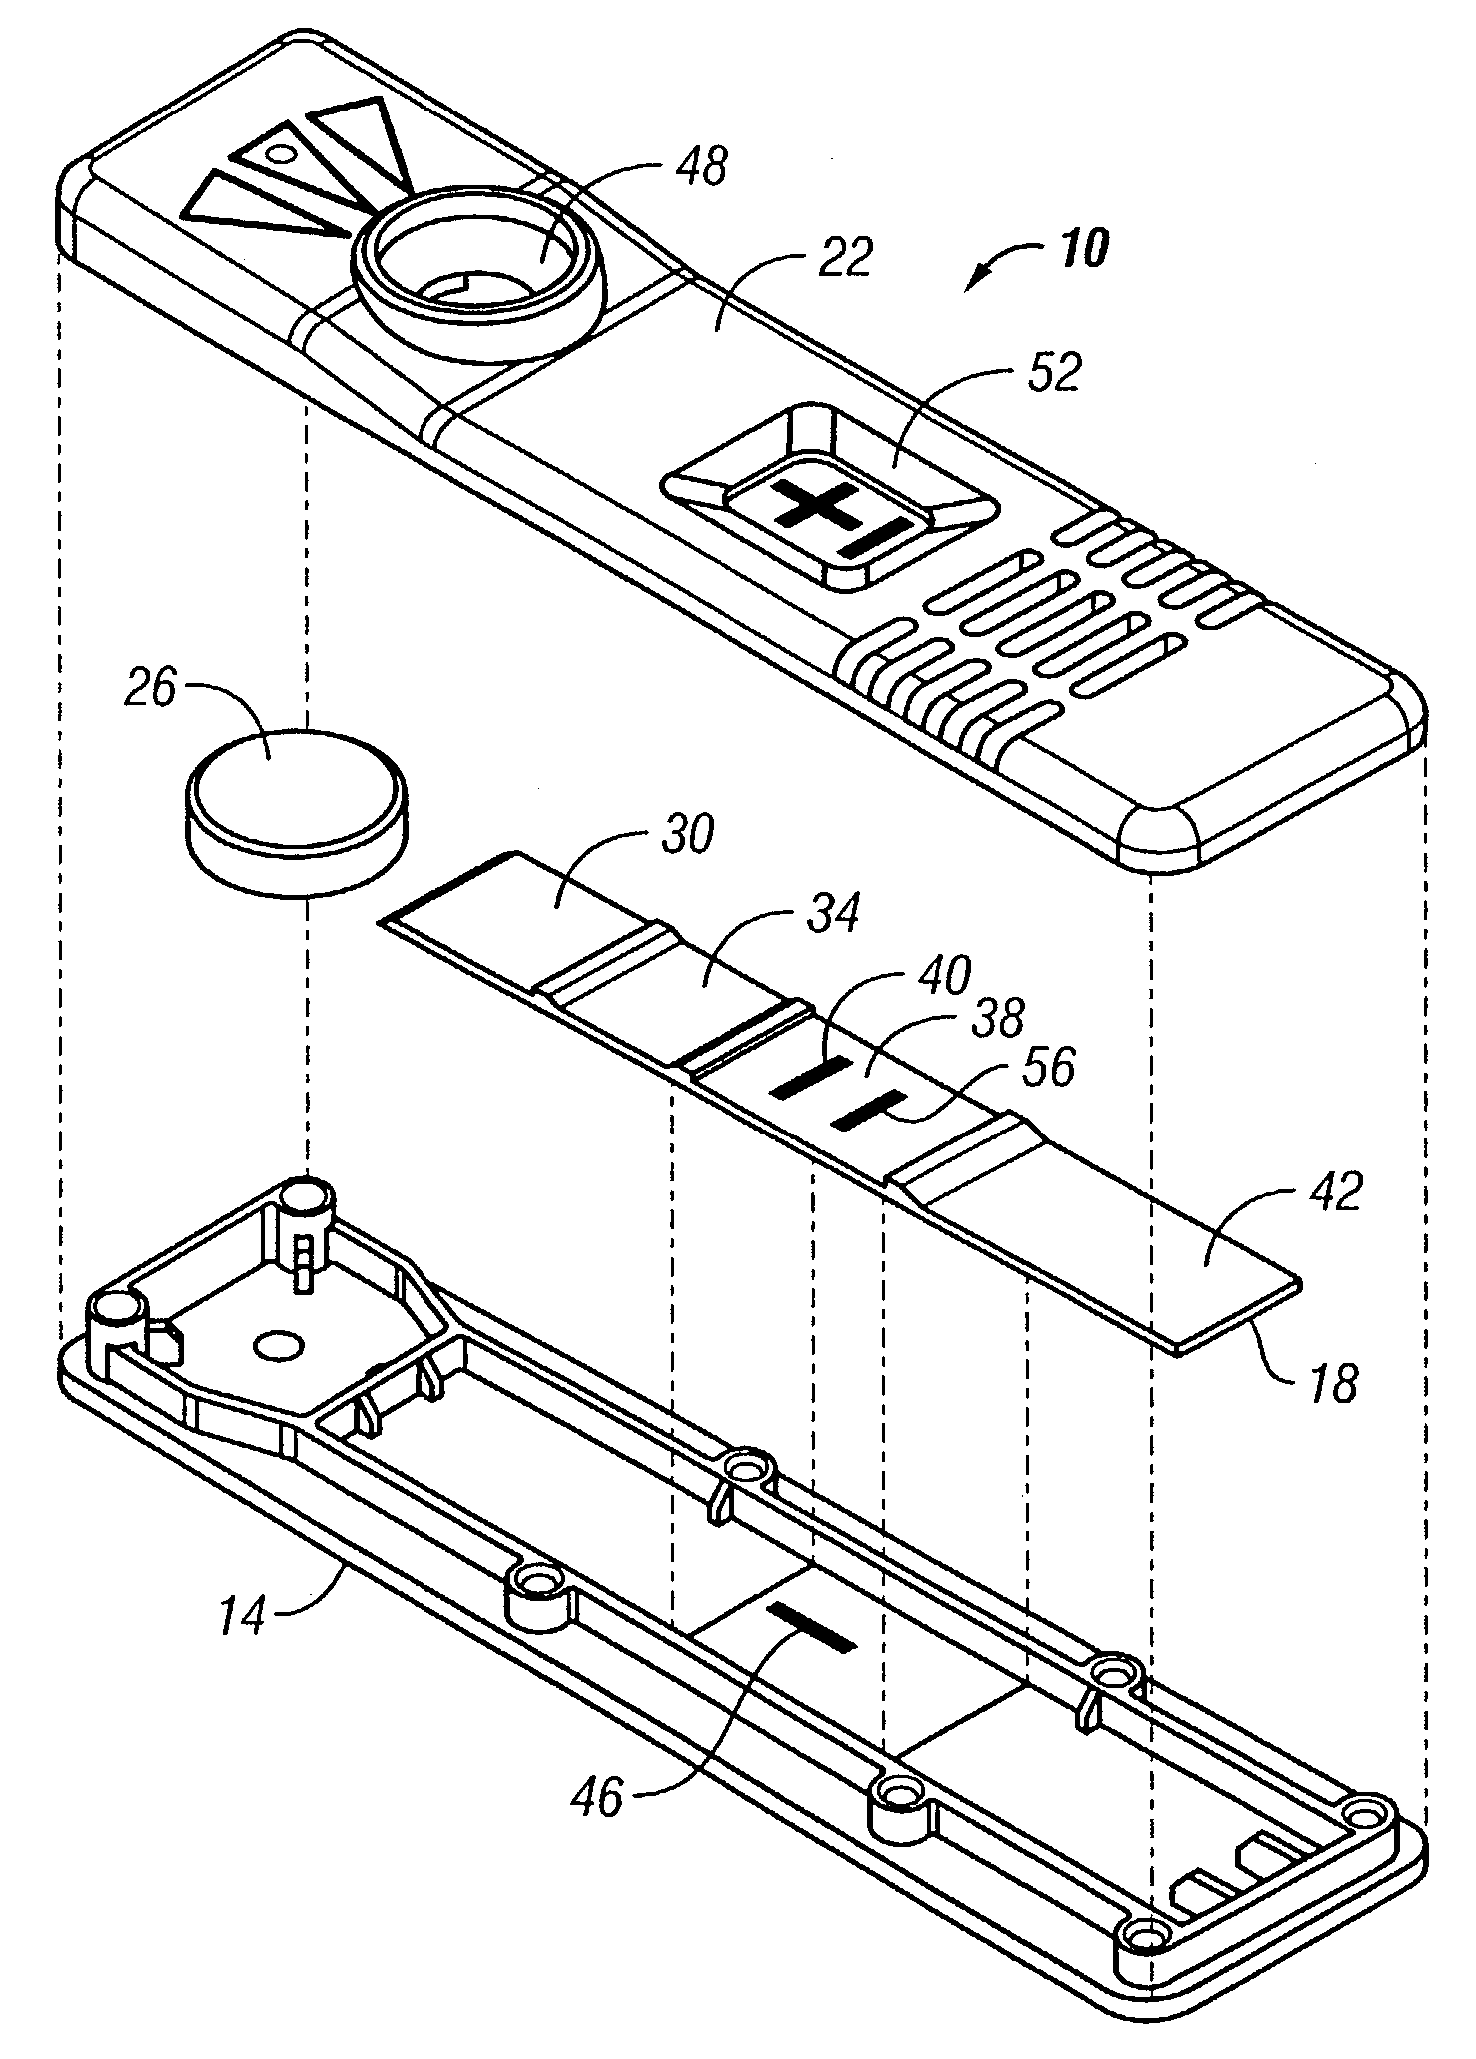 Method for adding an apparent non-signal line to a rapid diagnostic assay